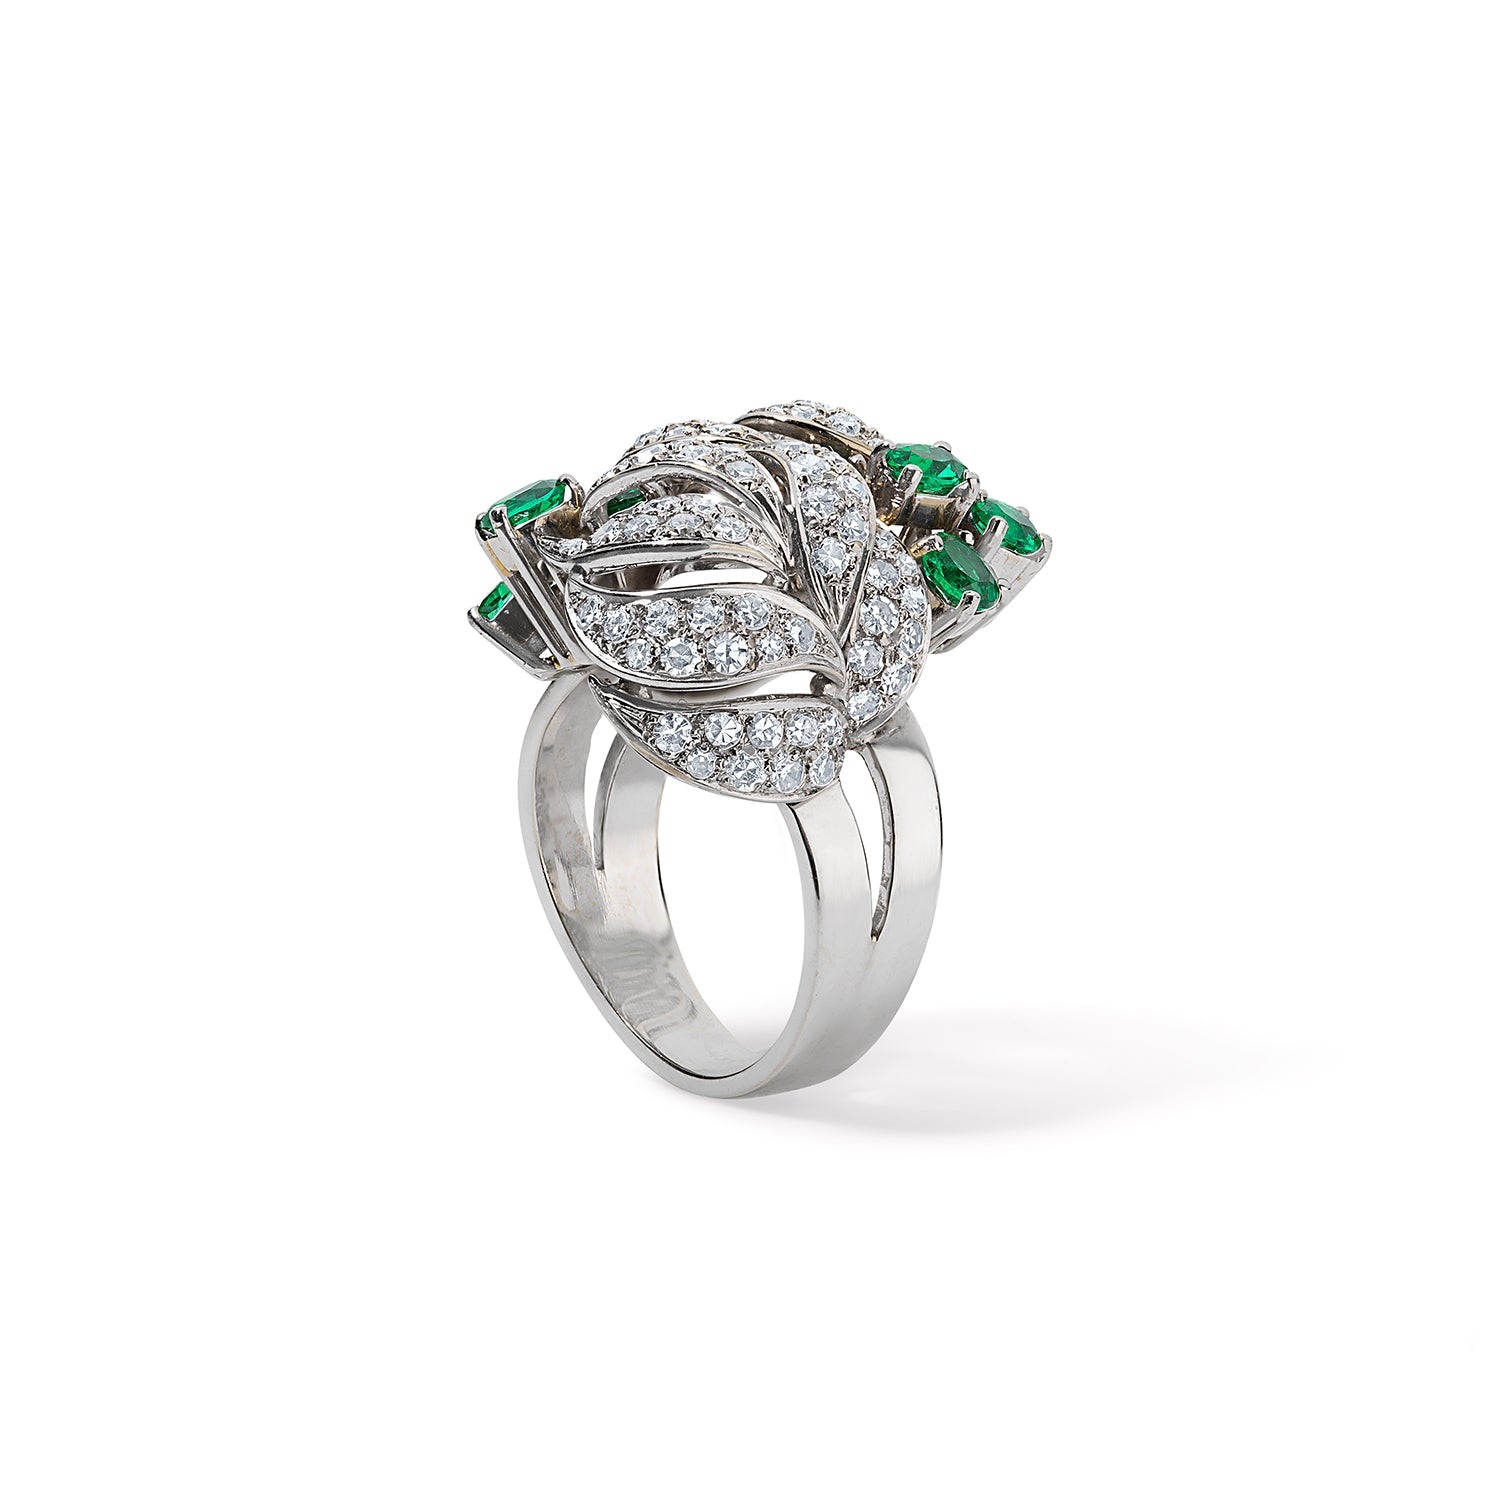 Vintage Diamond and Emerald Floral Motif Ring